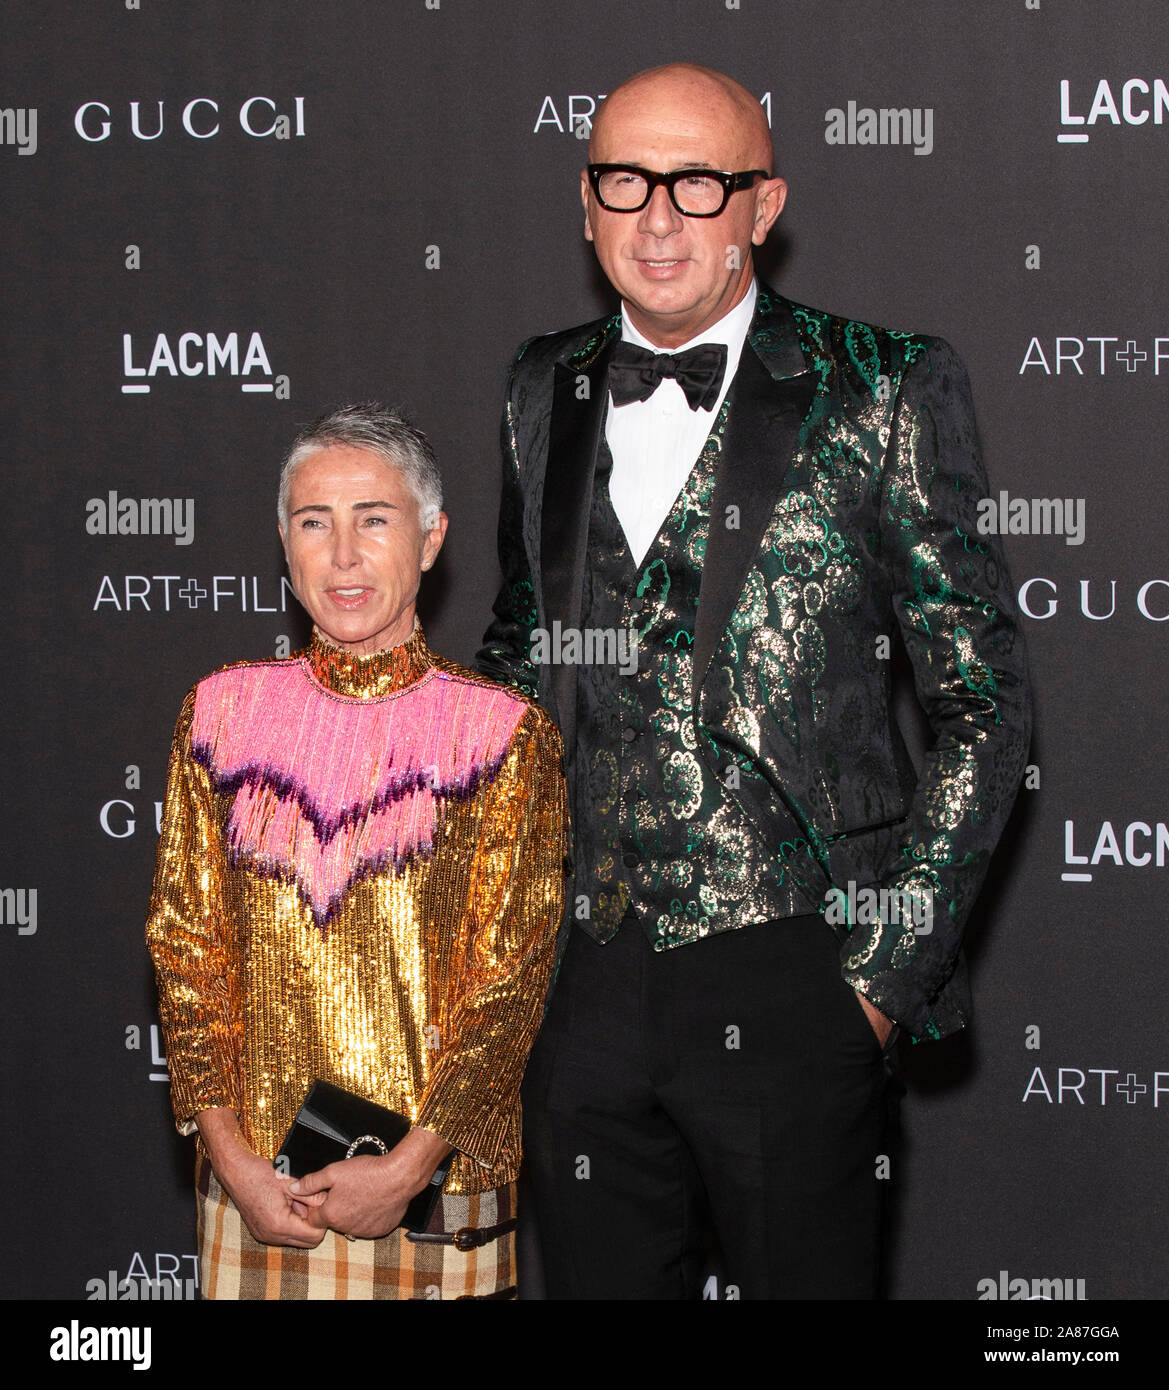 Los Angeles, California - November 02, 2019: Marco Bizzarri and Guest  arrive at the 2019 LACMA Art + Film Gala Presented By Gucci Stock Photo -  Alamy